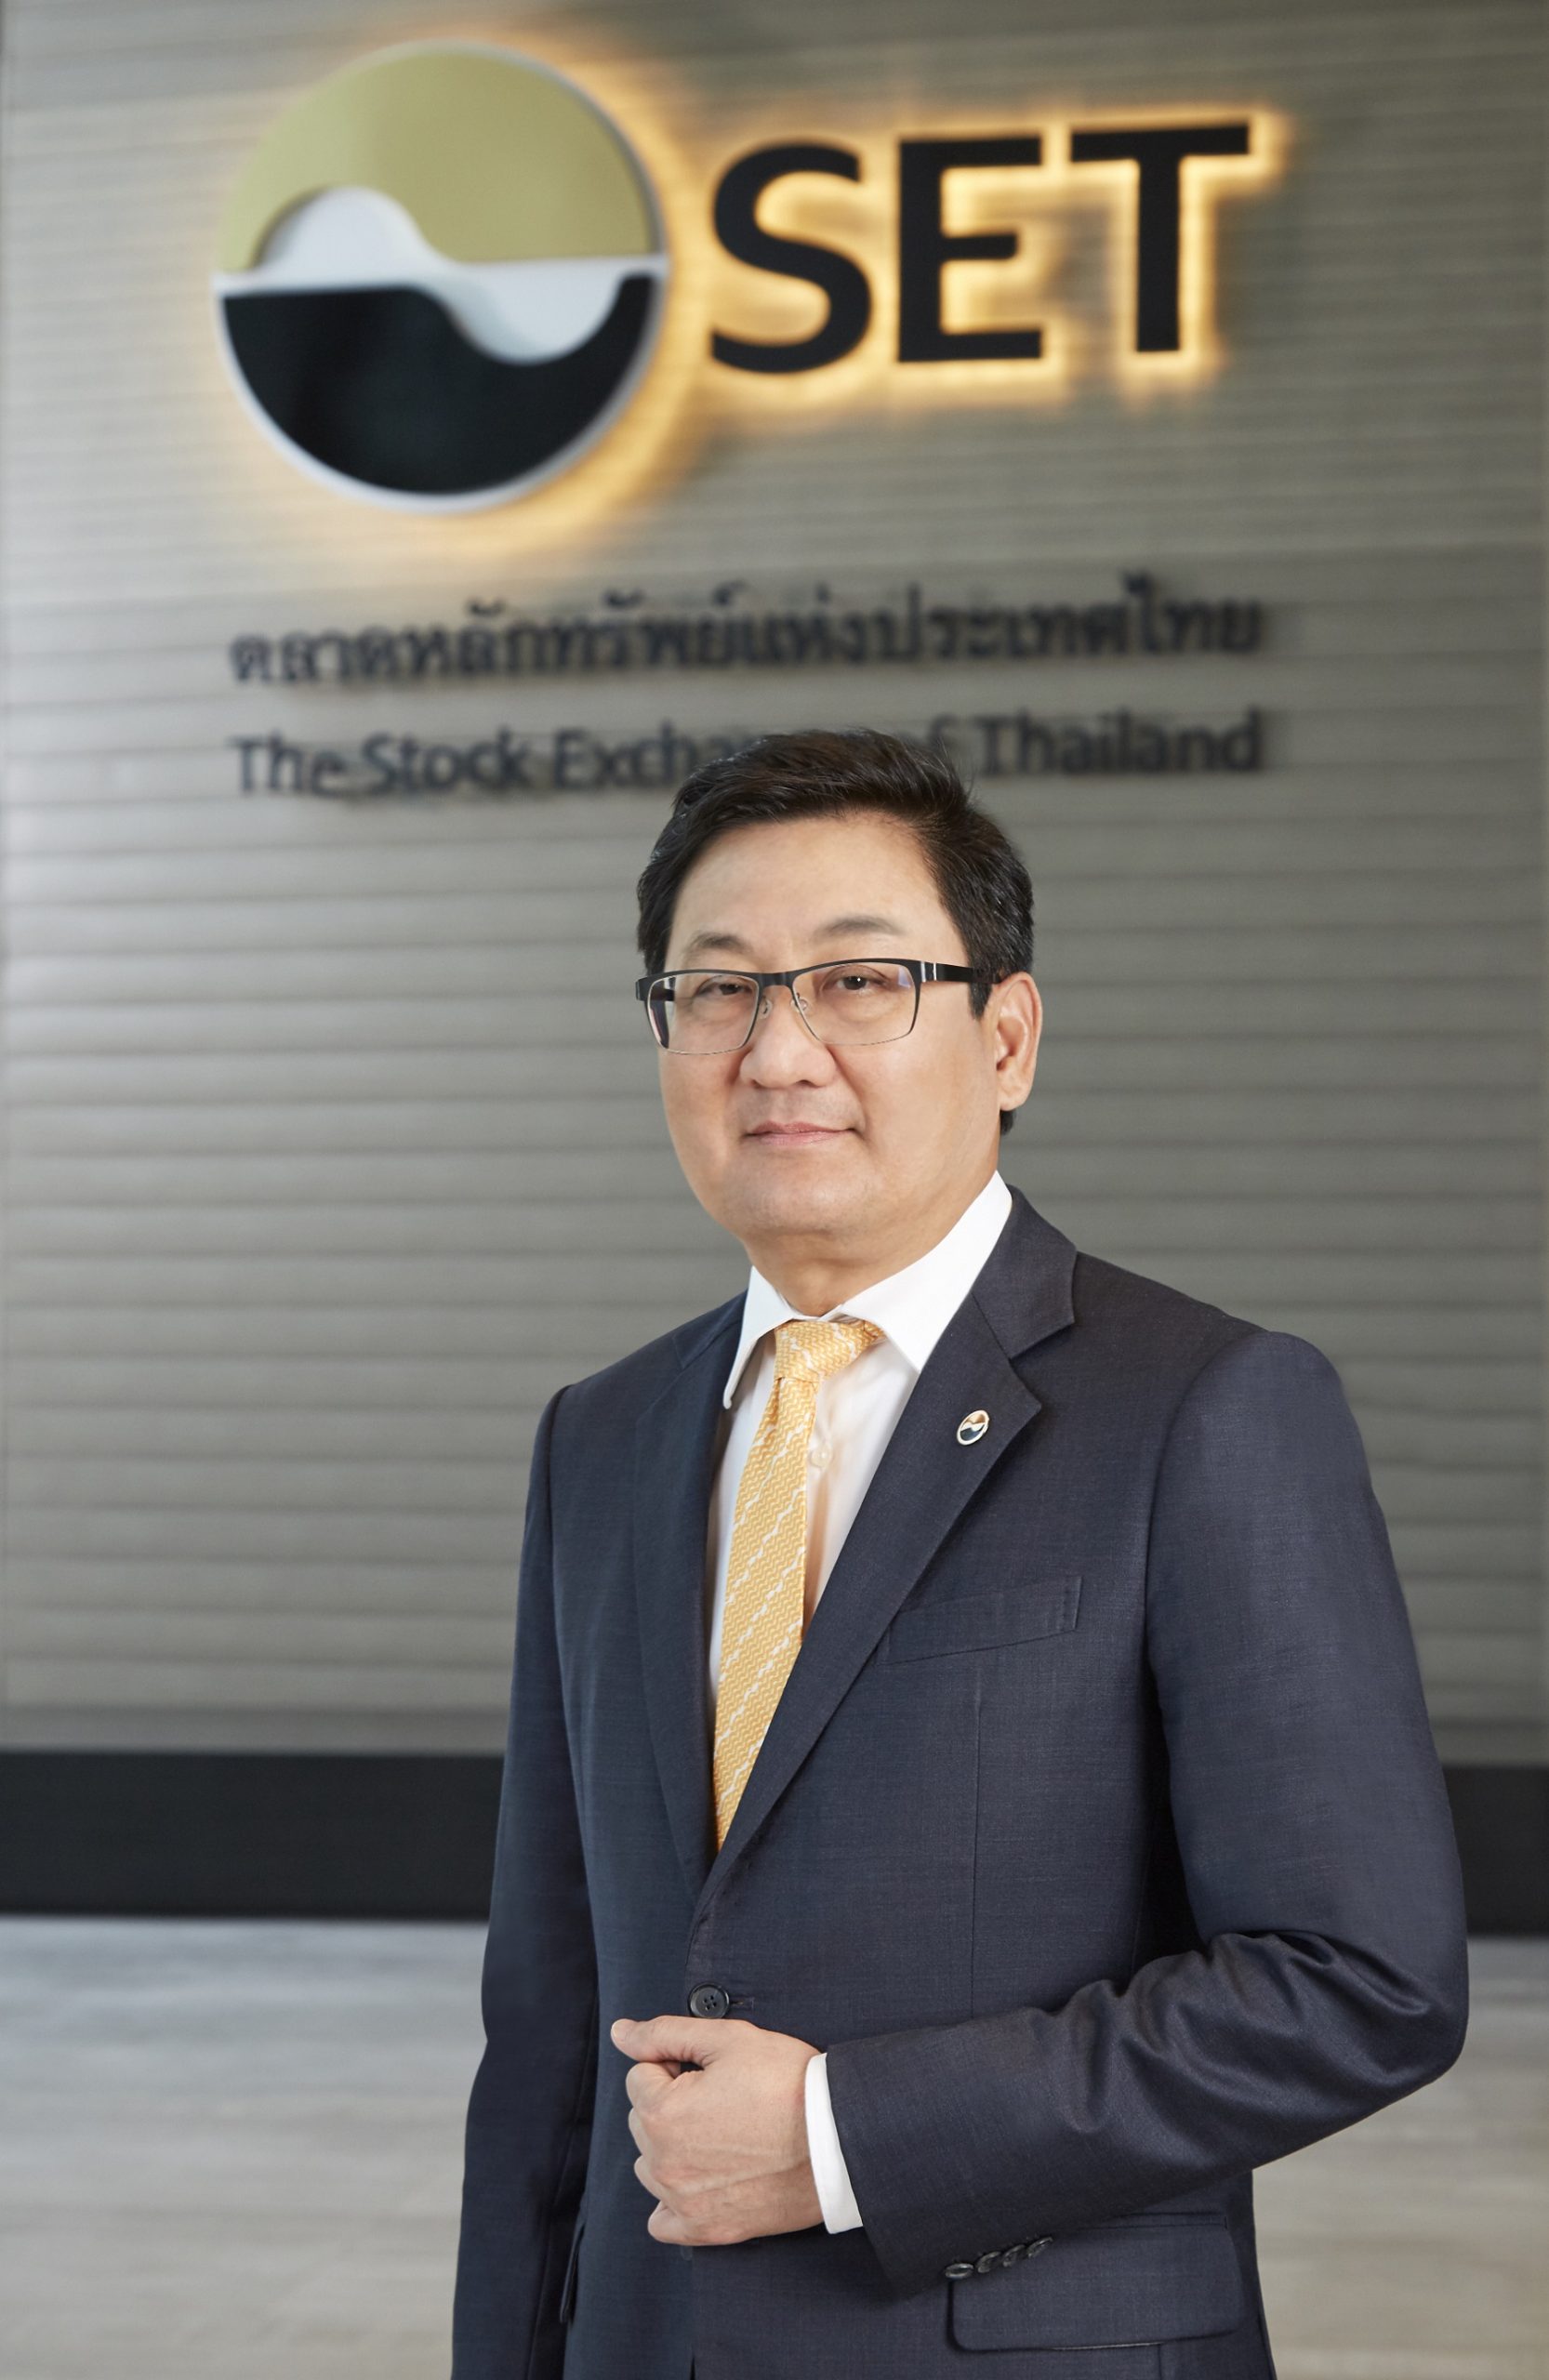 SET ensures stability of the Thai capital market amid global high volatility